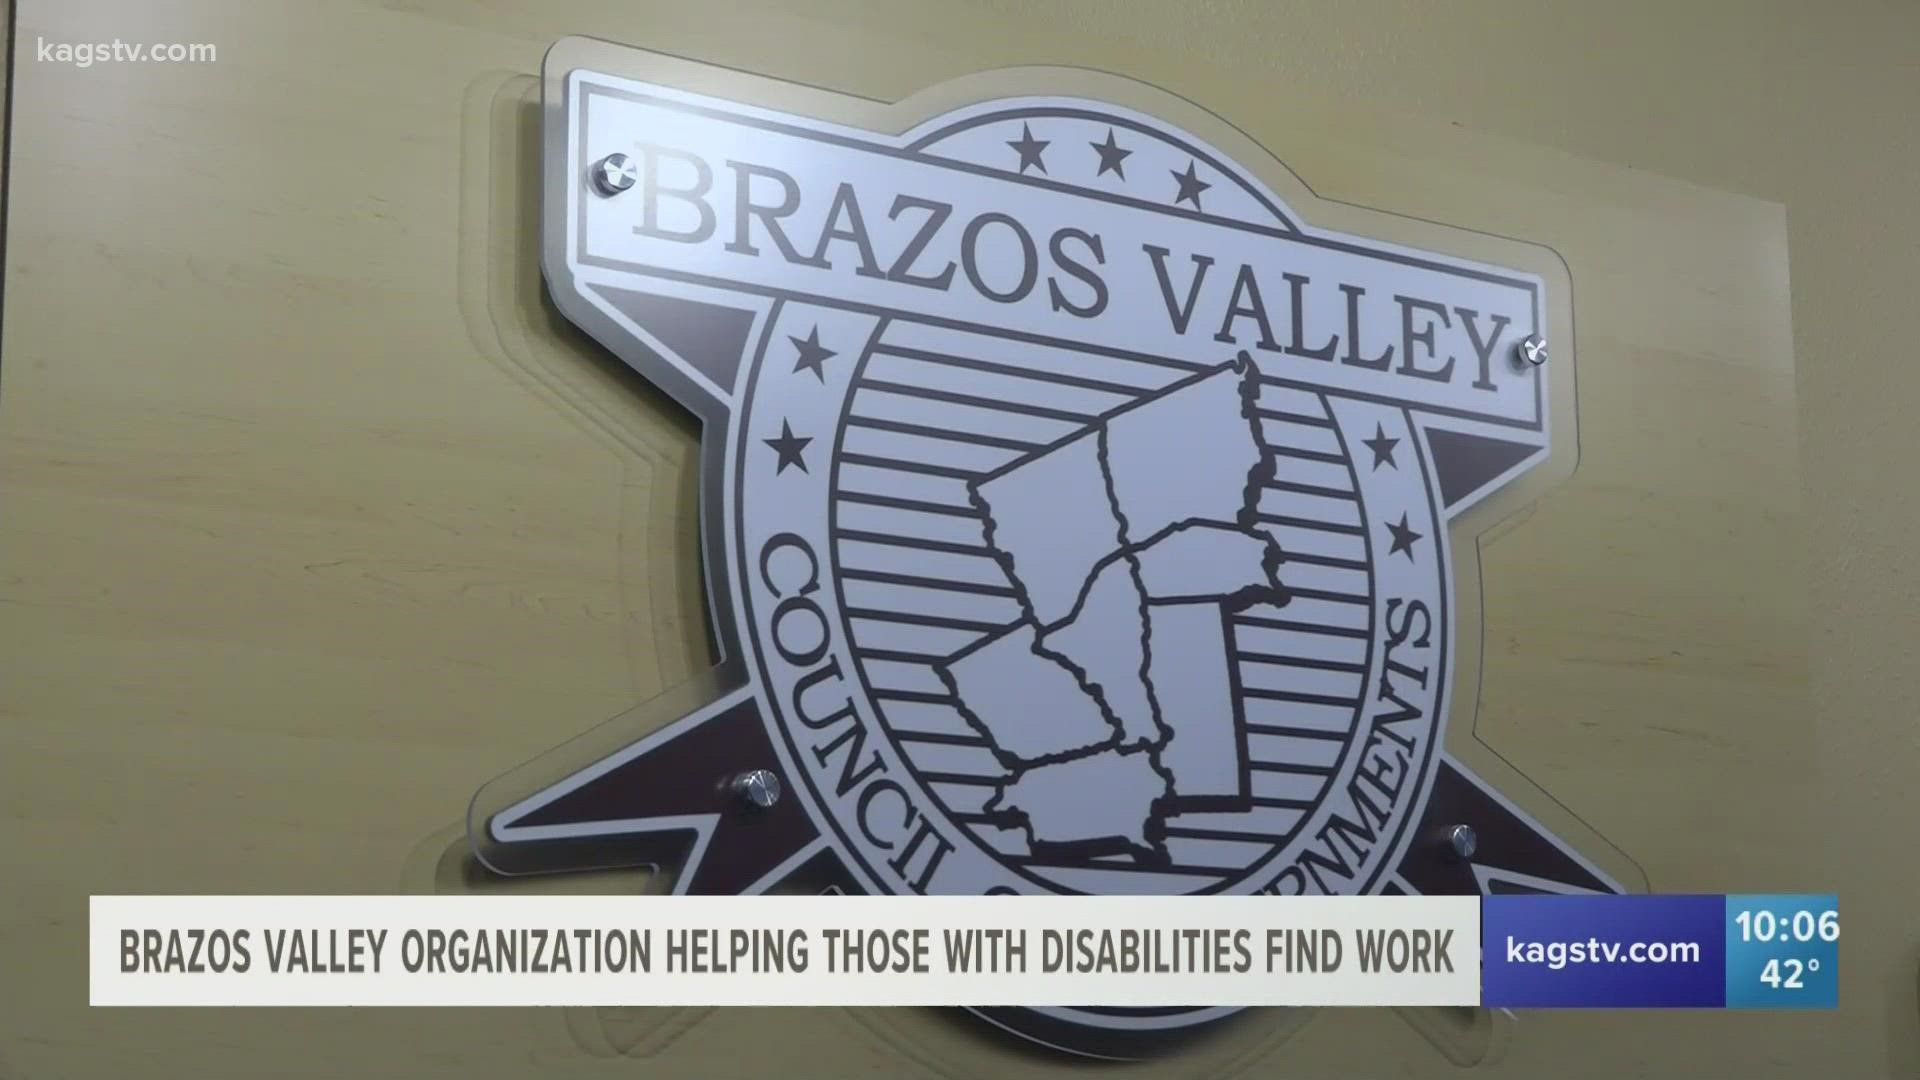 Employers from across the Brazos Valley were invited to talk about hiring workers of different abilities and ages